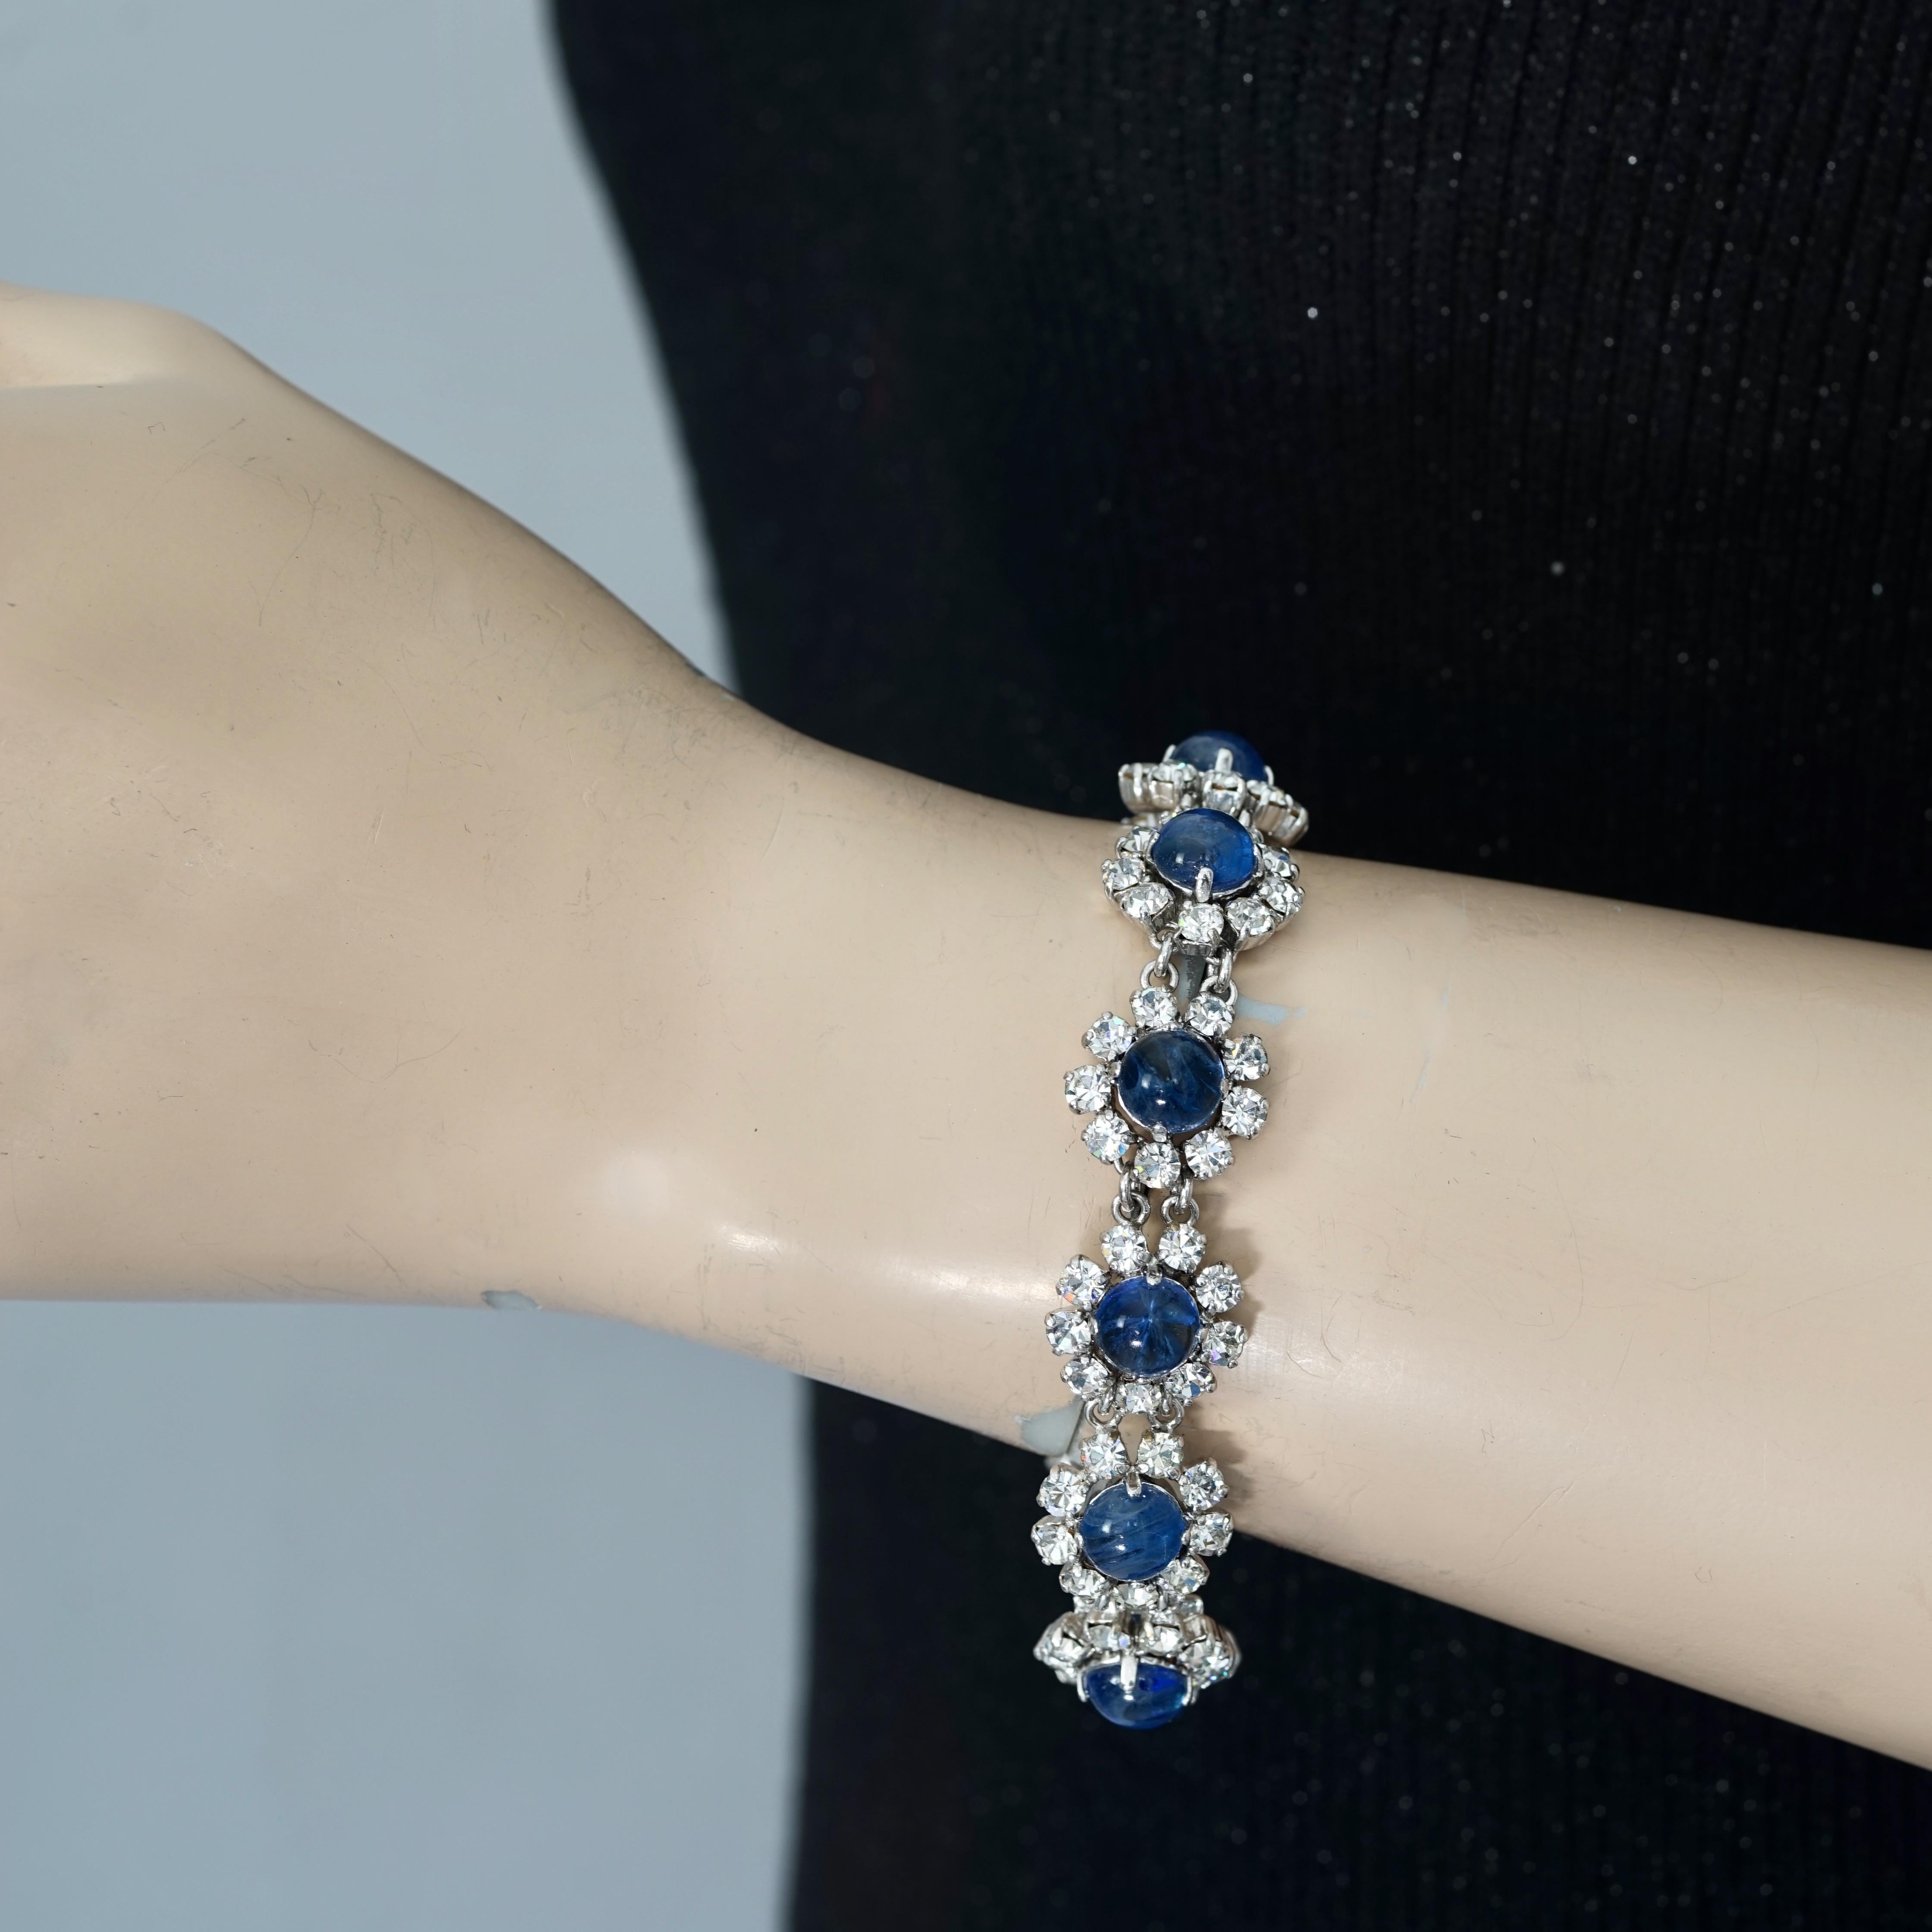 Vintage 1973 CHRISTIAN DIOR Blue Glass Cabochon Rhinestone Bracelet

Measurements:
Height: 0.63 inch (1.6 cm)
Wearable Length: 7.28 inches (18.5 cm)

Features:
- 100% Authentic CHRISTIAN DIOR.
- Blue round glass cabochon with rhinestones link